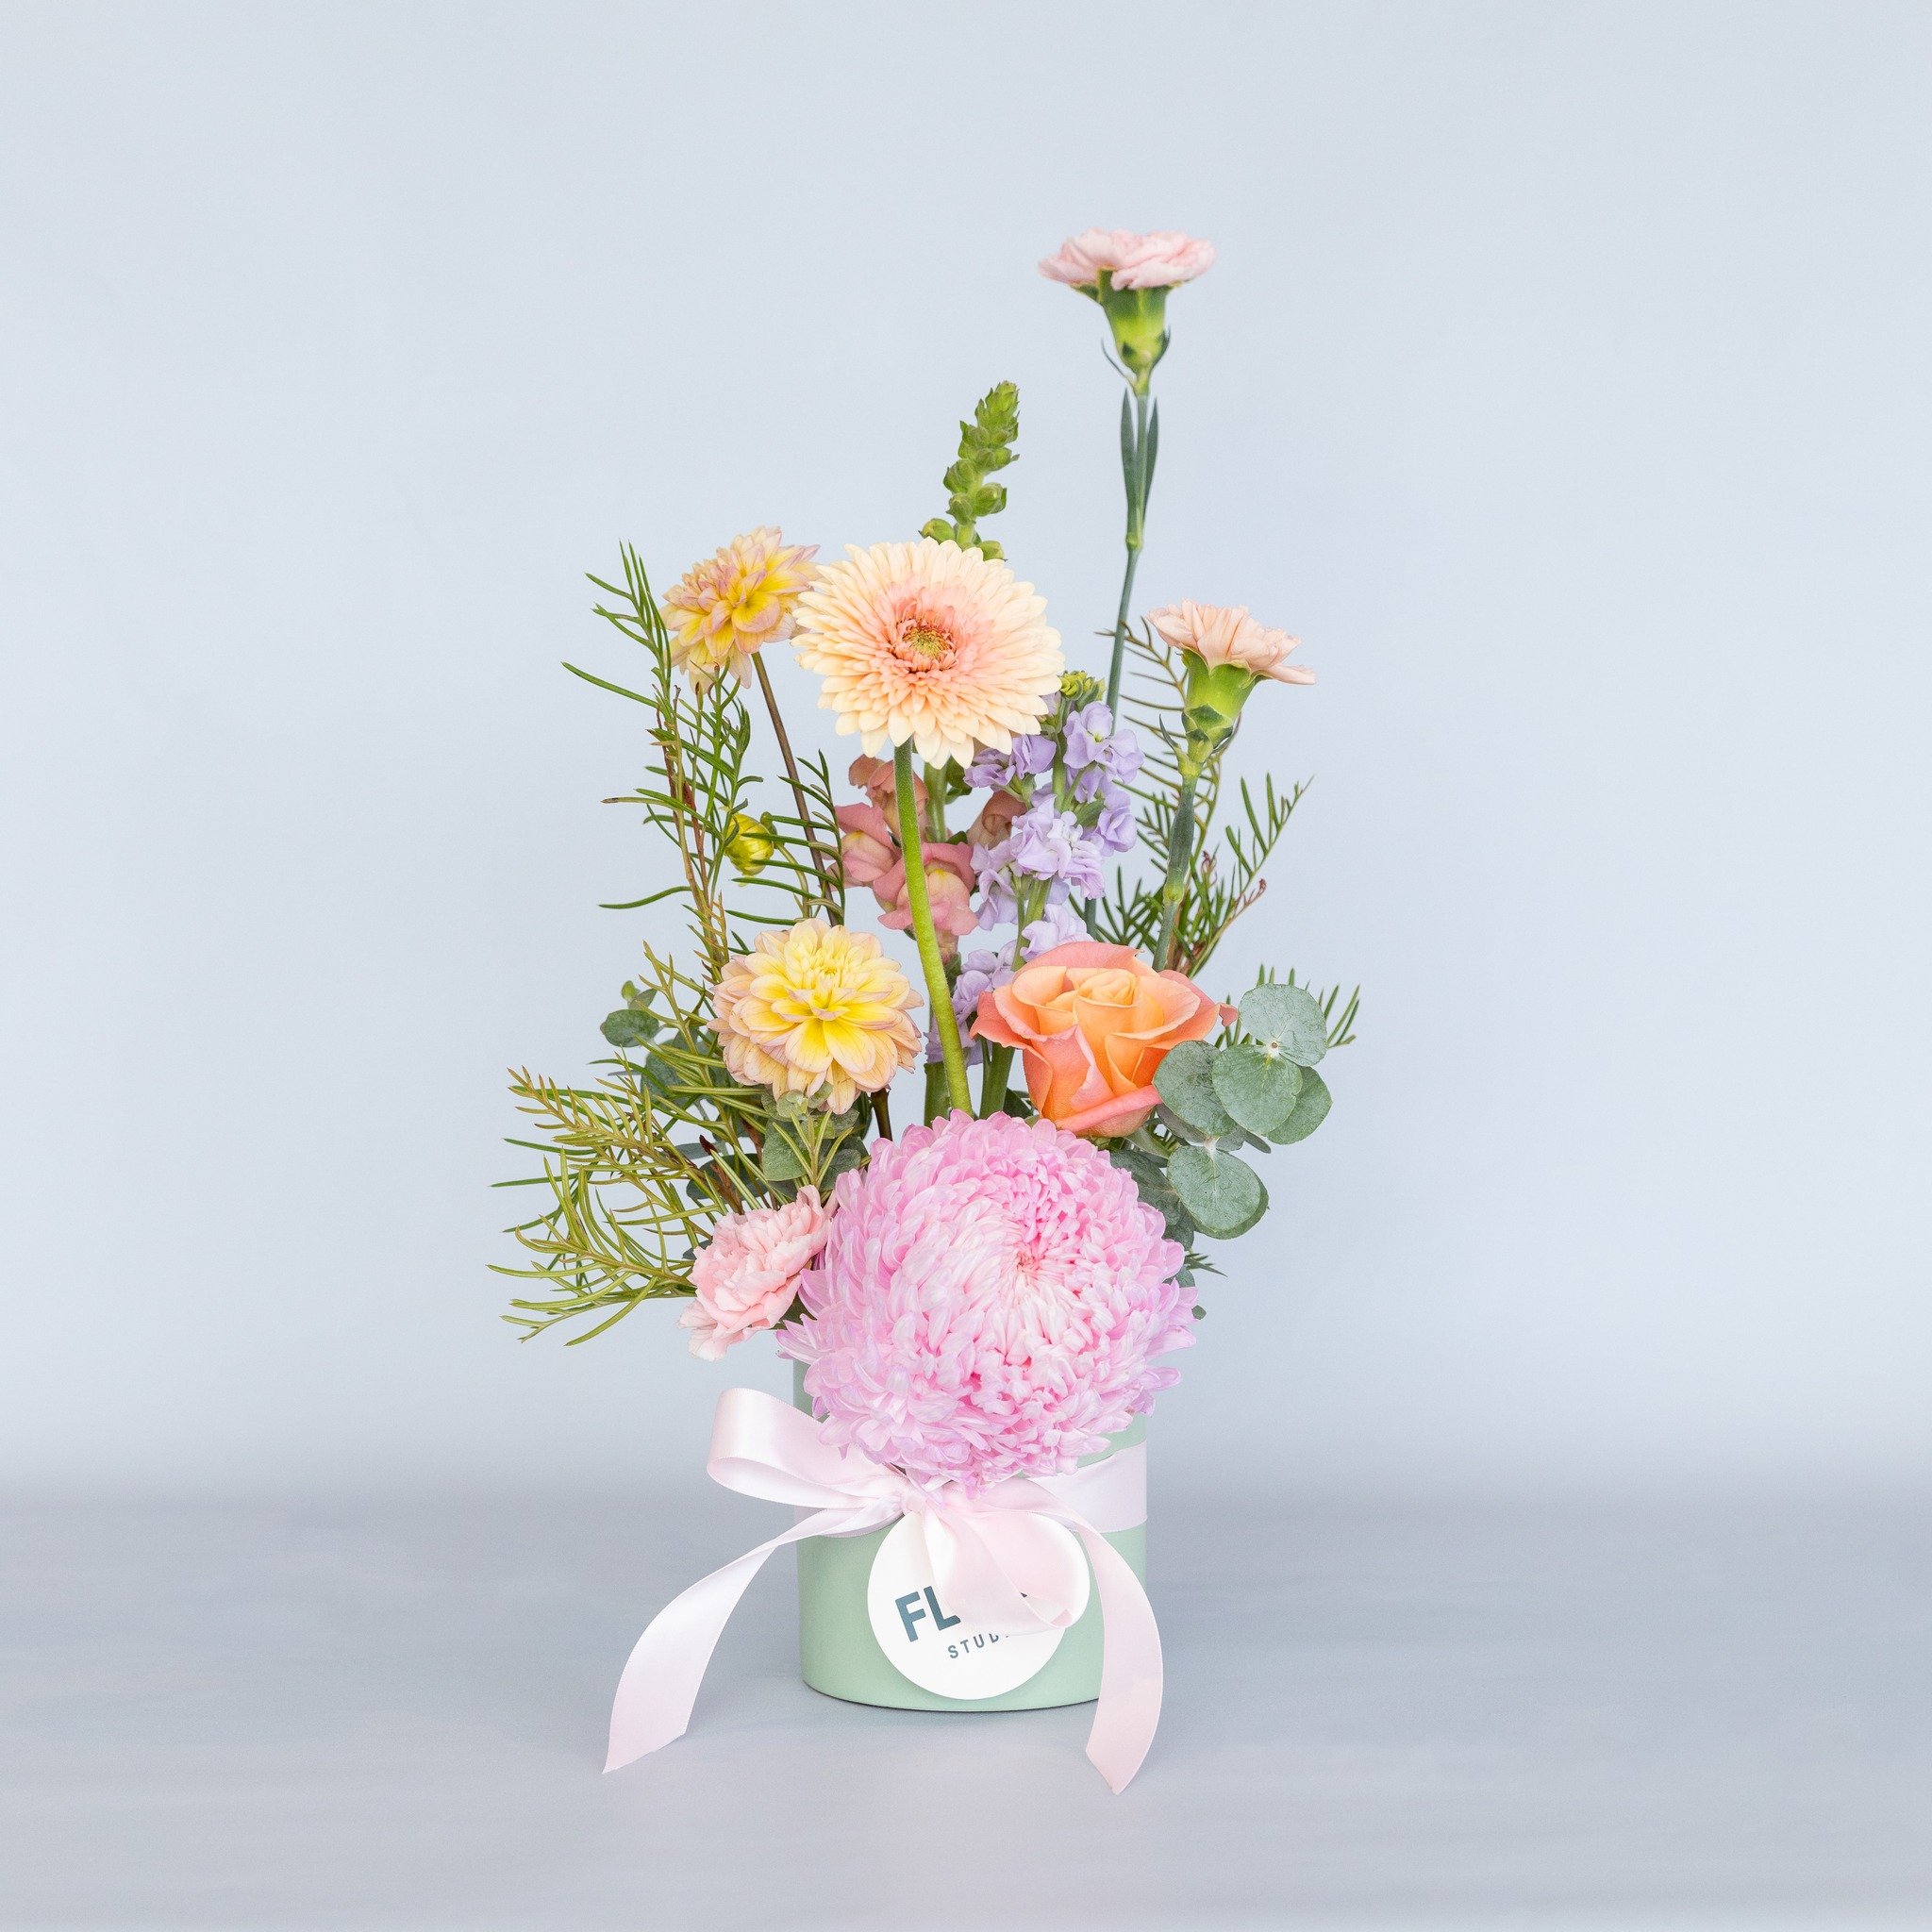 Don't forget to pre-order your Mother's Day bouquets by 5pm tomorrow, the 9th May! 🌸

Tap the link in our bio to check out the full Mother's Day collection 👆